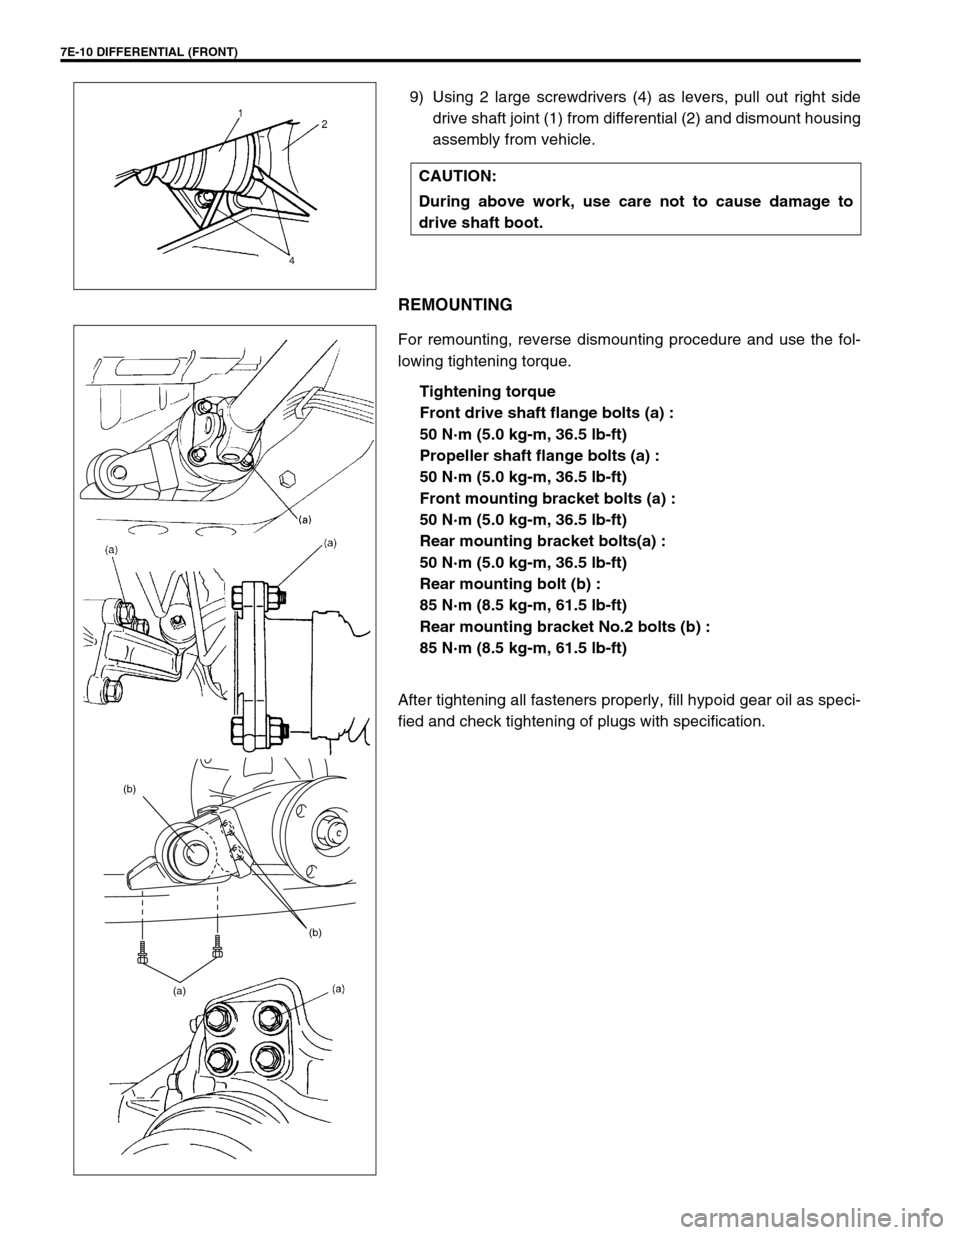 SUZUKI GRAND VITARA 1999 2.G Owners Manual 7E-10 DIFFERENTIAL (FRONT)
9) Using 2 large screwdrivers (4) as levers, pull out right side
drive shaft joint (1) from differential (2) and dismount housing
assembly from vehicle.
REMOUNTING
For remou